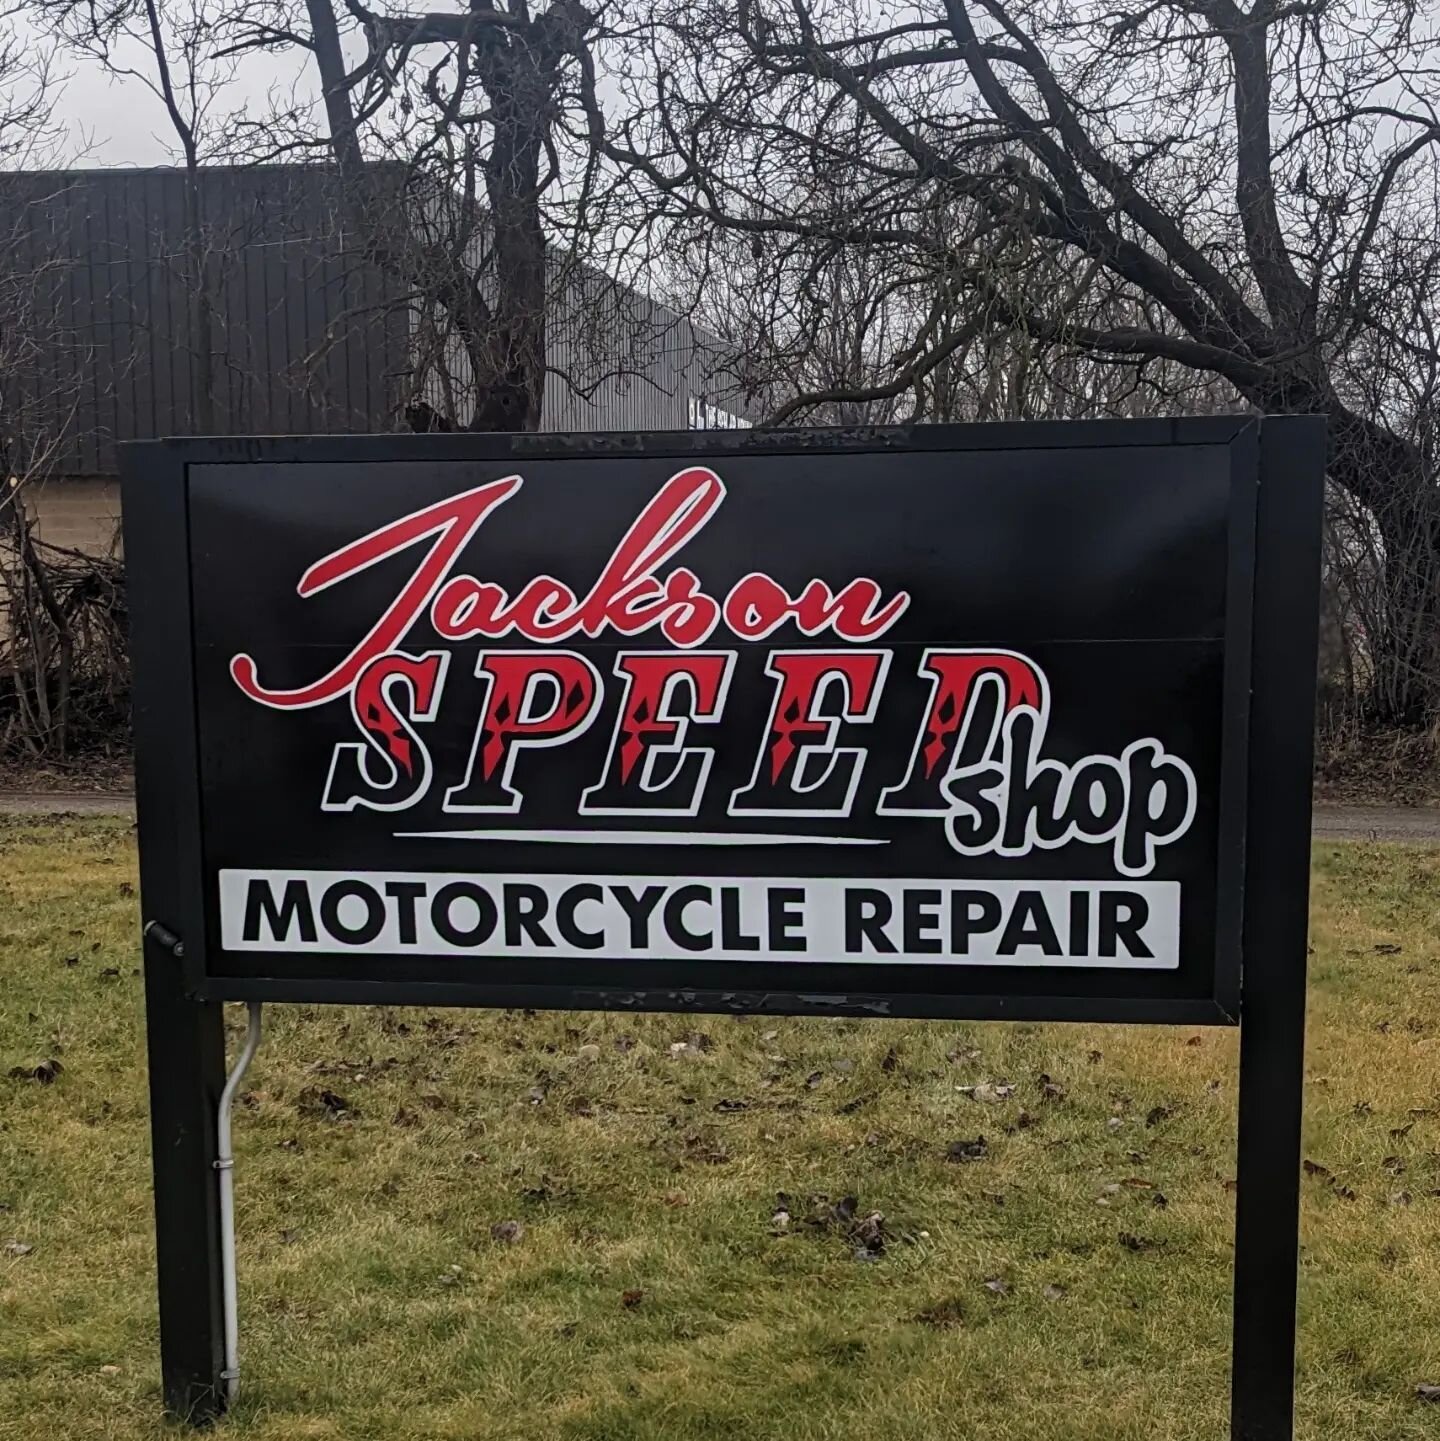 The new sign is up! 
Shop will be opening back up January 30th!  I look forward to getting back to business!